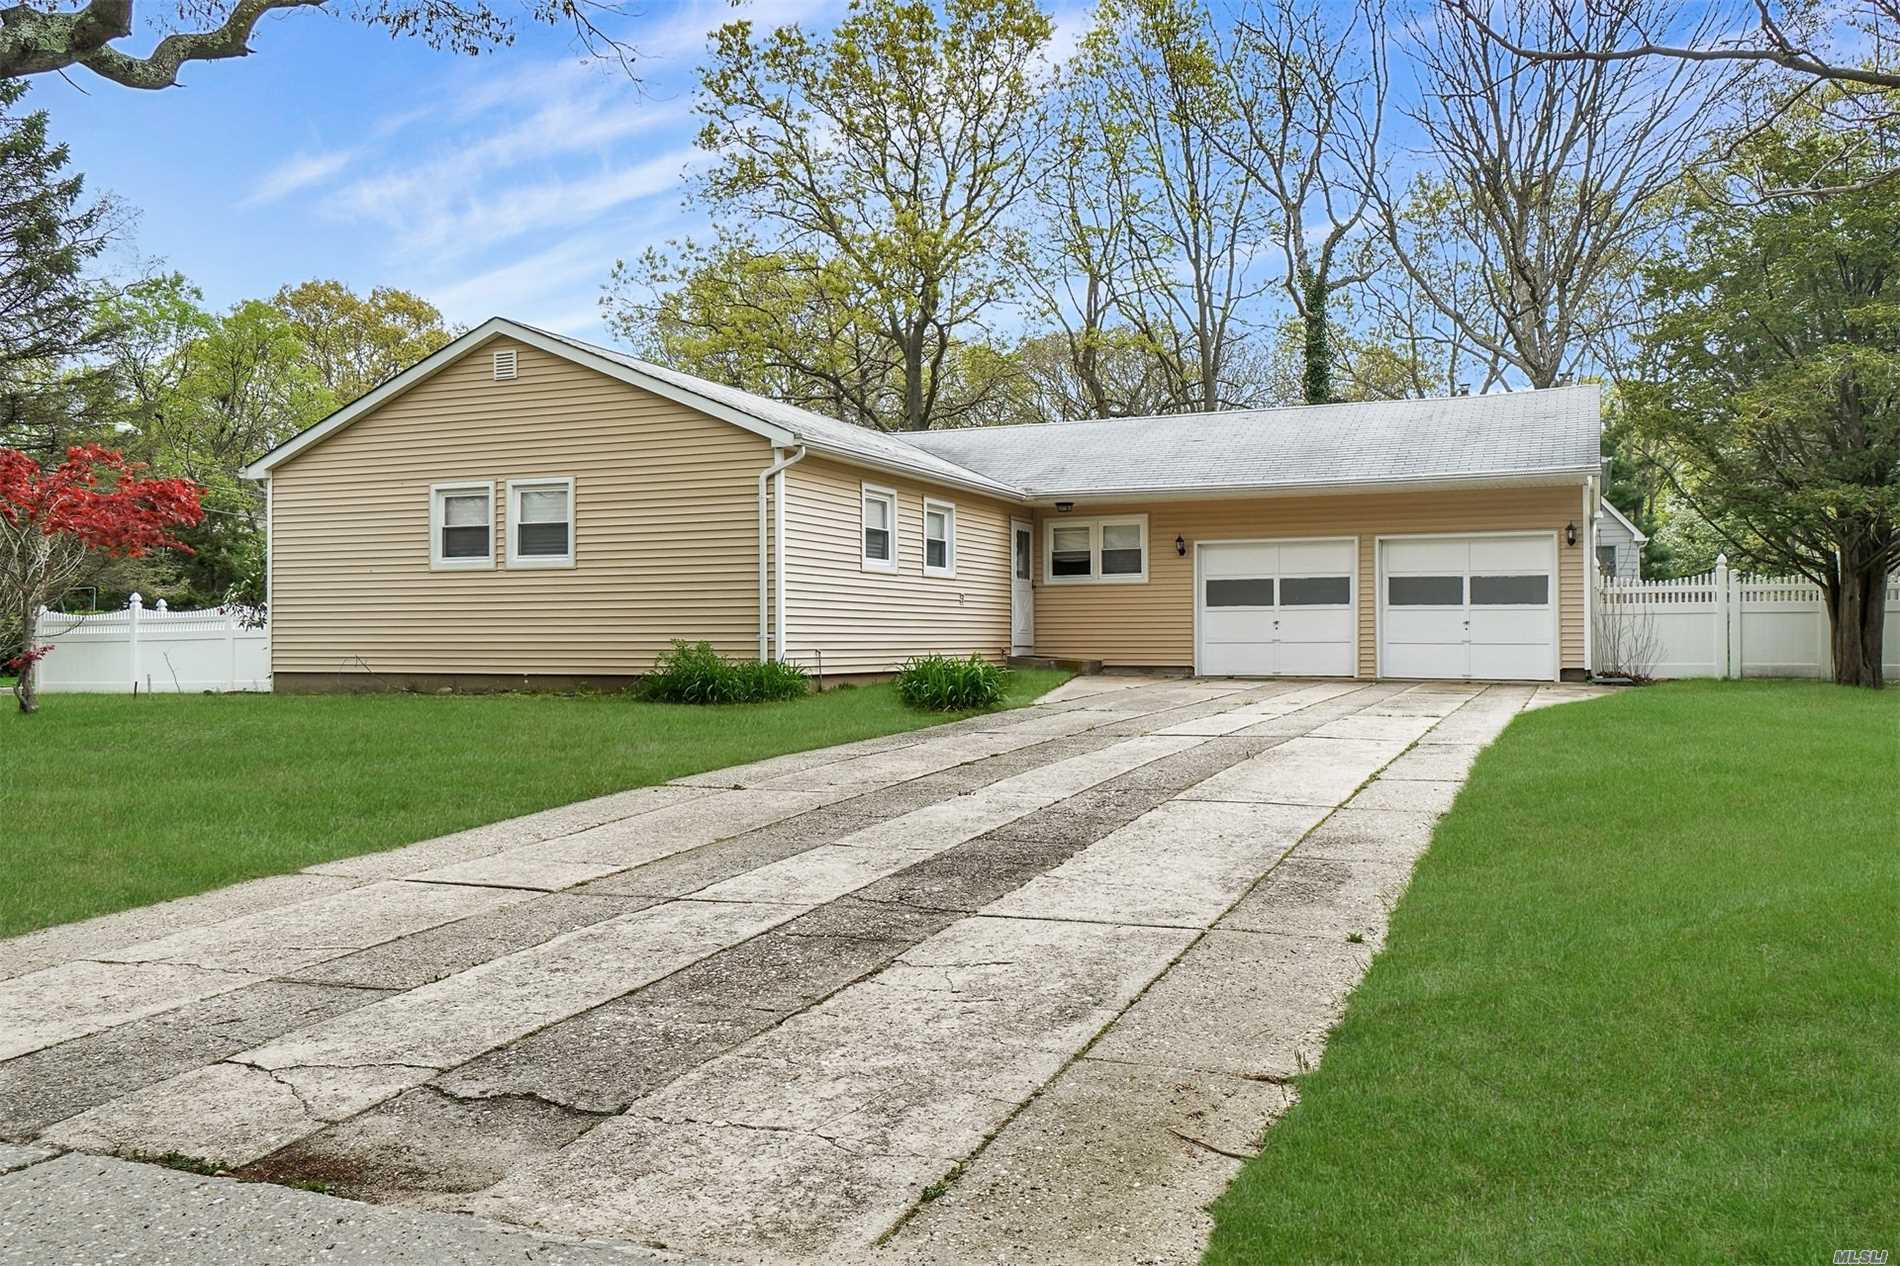 Move in ready spacious ranch in Connetquot SD. Home has 3 nice size bedrooms, Updated EIK, LR/DR area, 2 car attached garage, with partial unfinished large basement. Home is sits on nice size corner lot with fenced in yard. Hurry you won&rsquo;t want to miss this home it will go fast!